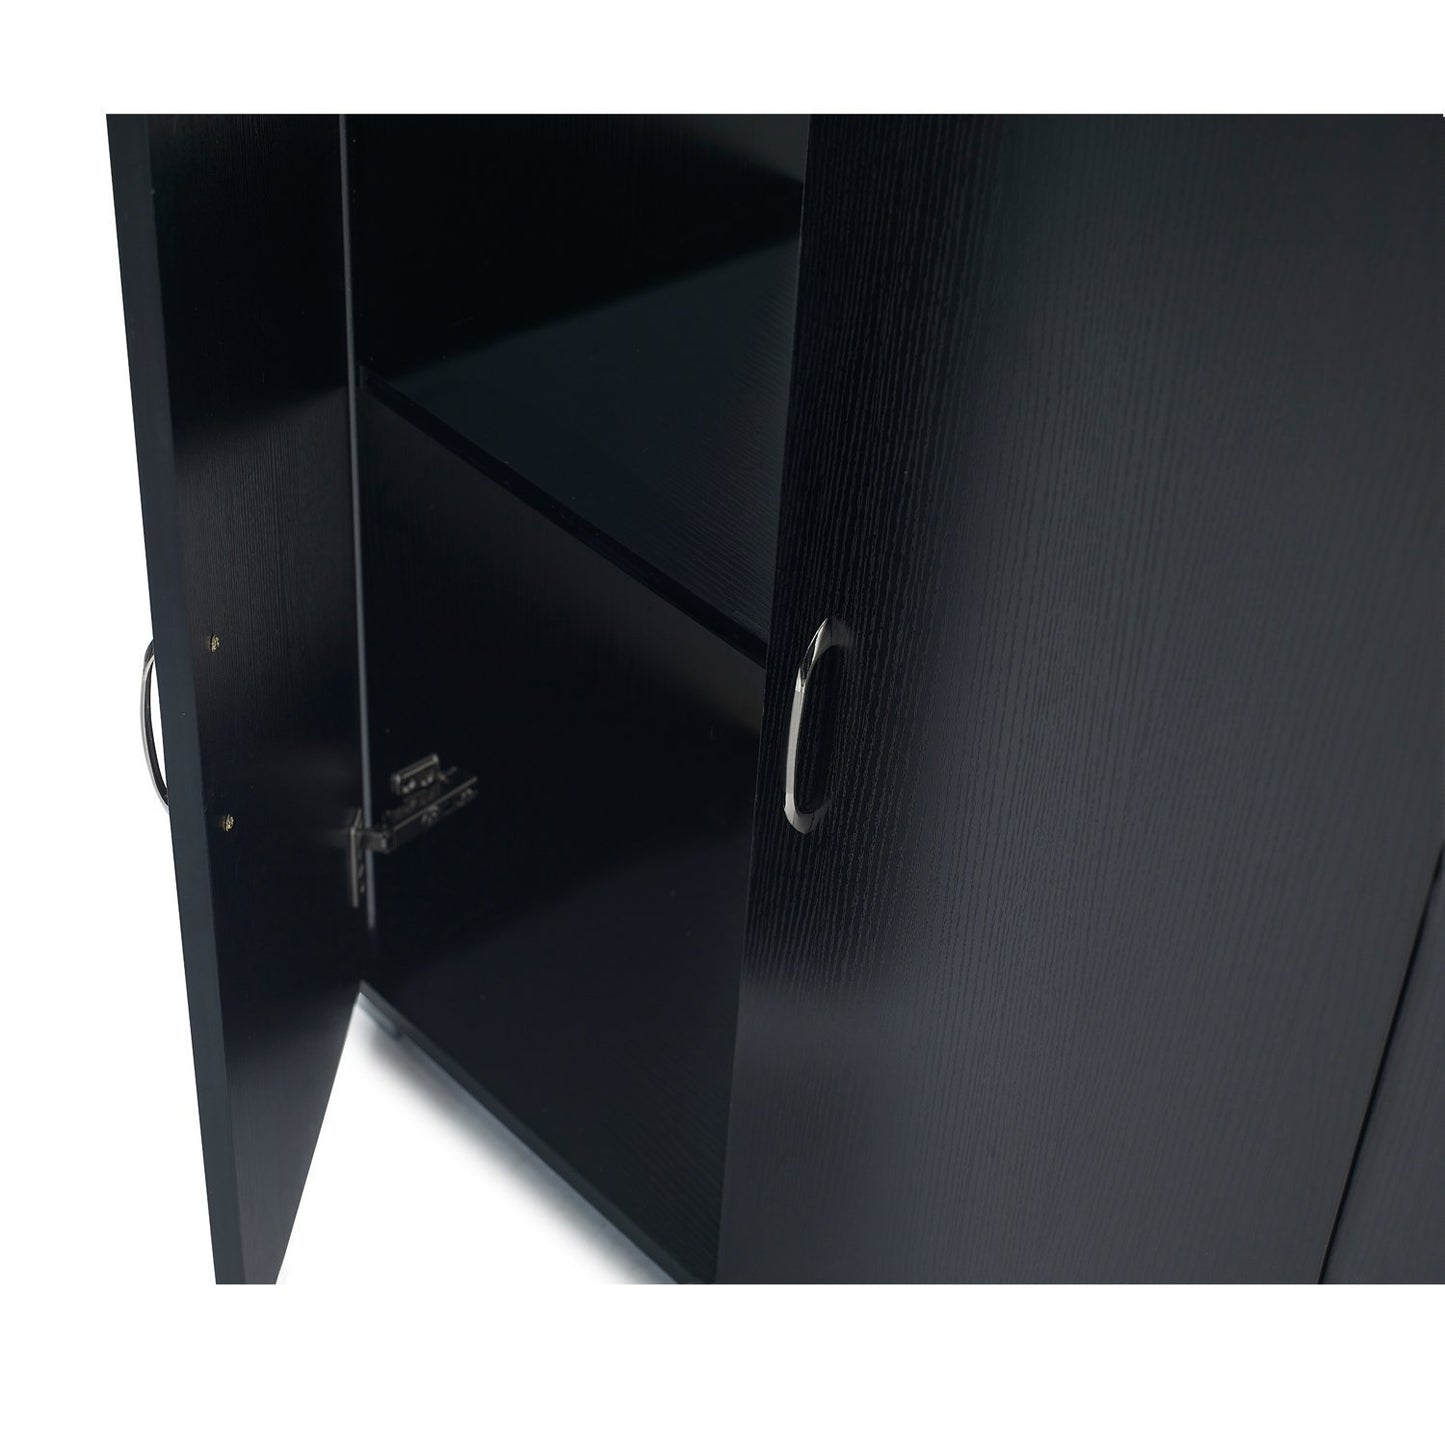 Home Office Cupboard Cabinet in Black - Laura James